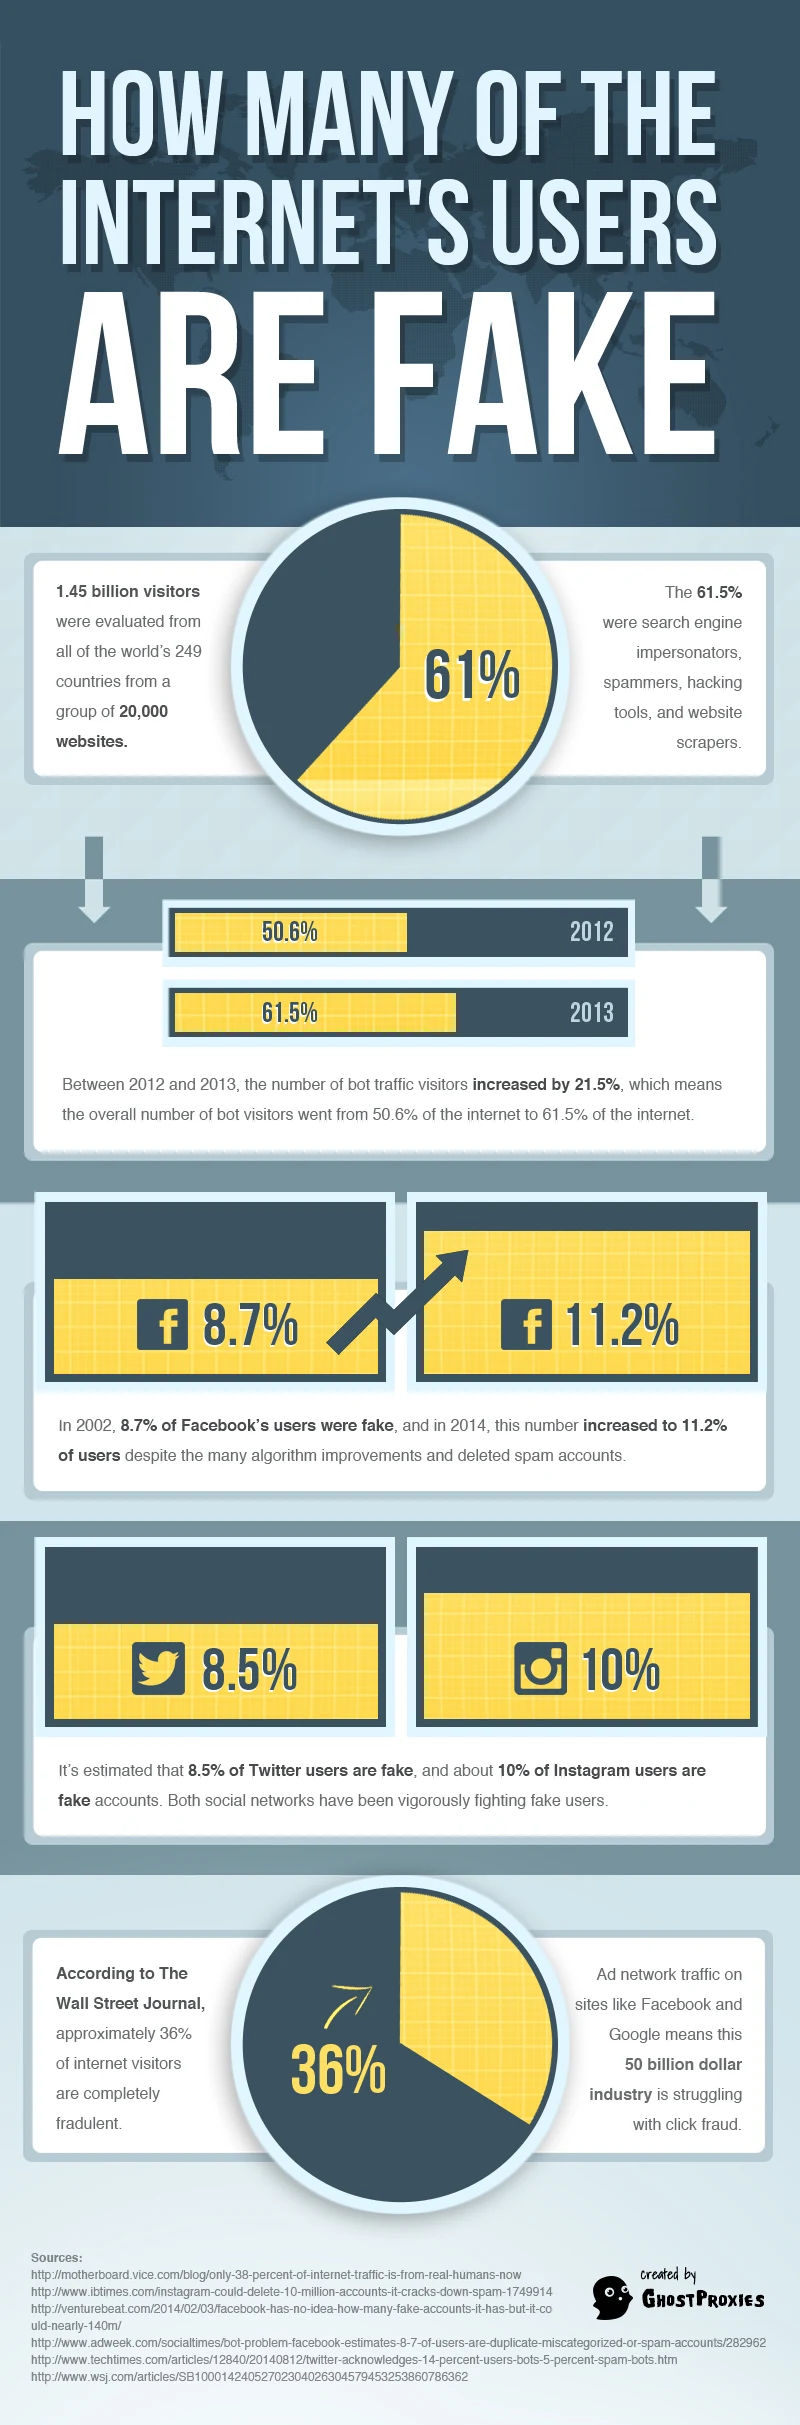 How Many Of The Internet’s Users Are Fake - #infographic